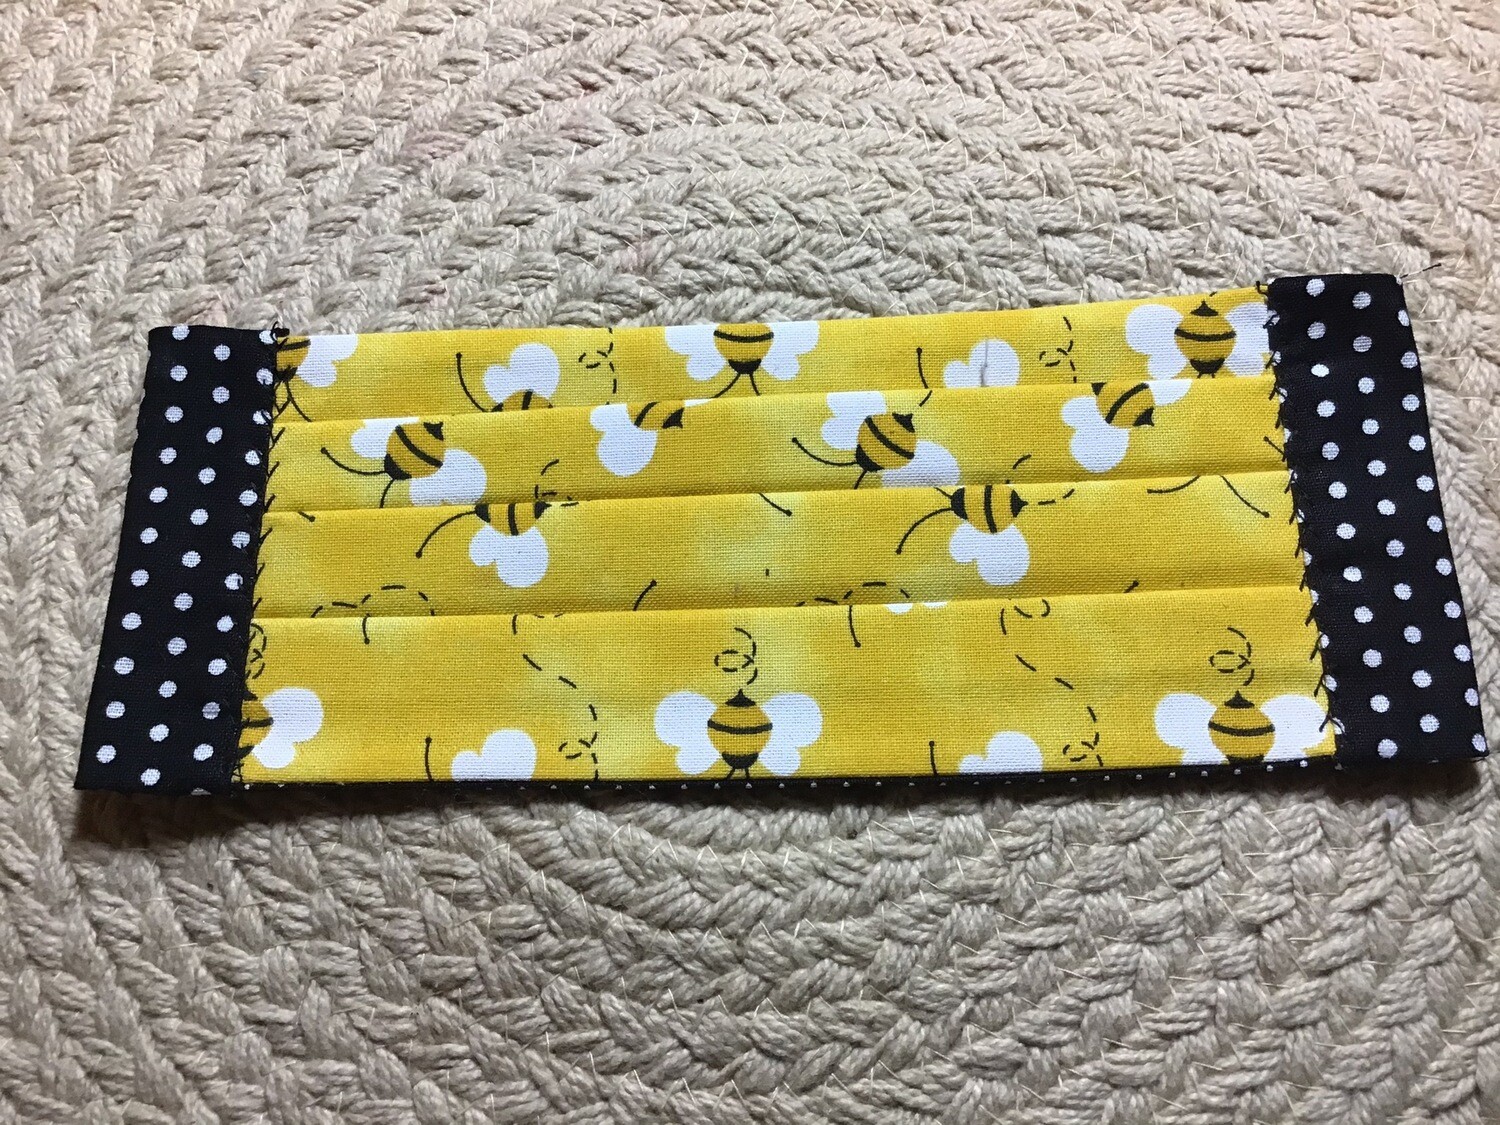 Artisan girl bumble bees measures 61/2“ - 2 Elastic Straps Included